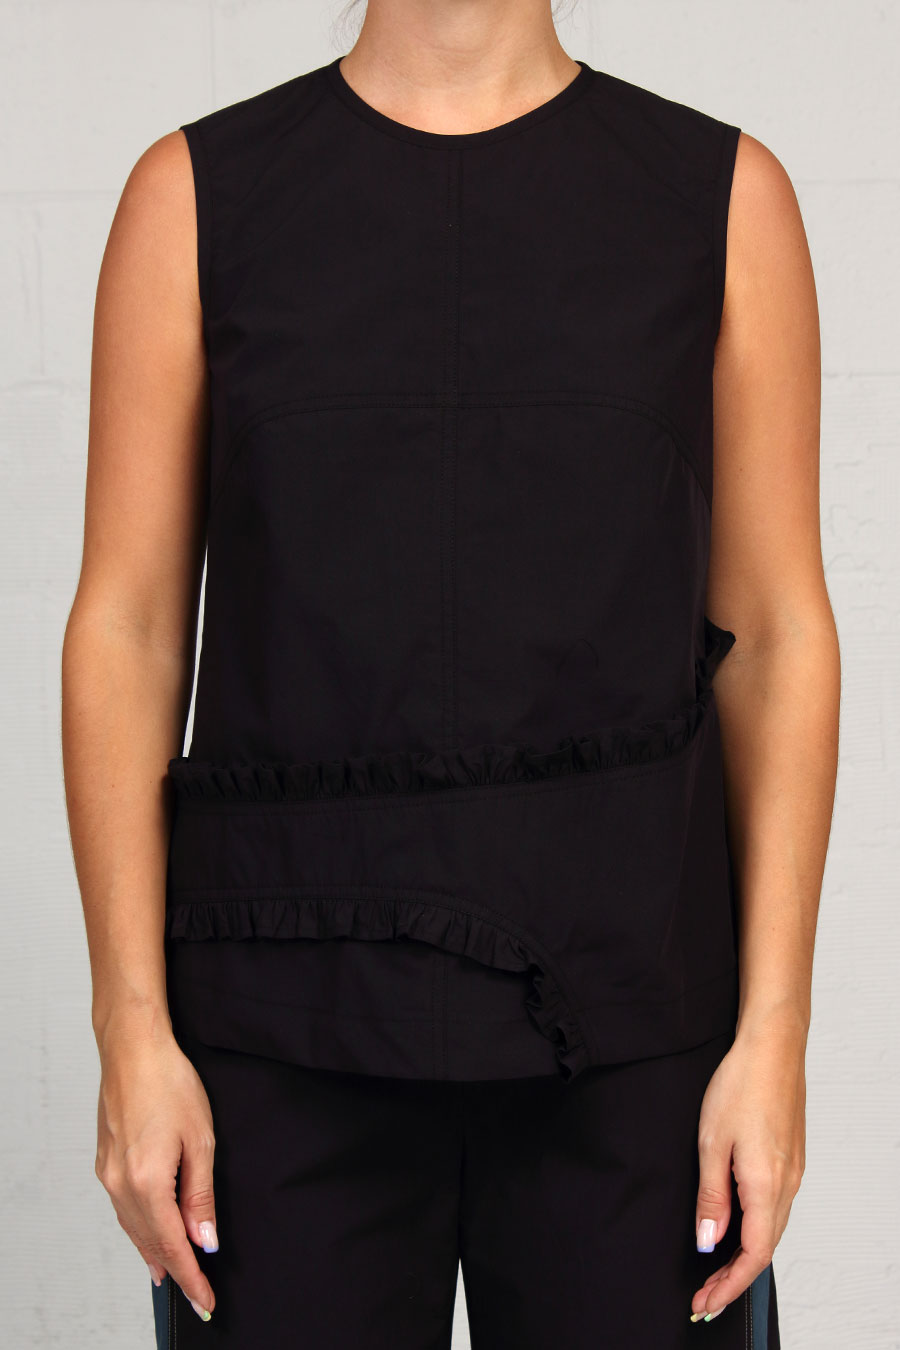 Solid Cottons Annie Top - Black - xlg - last one!